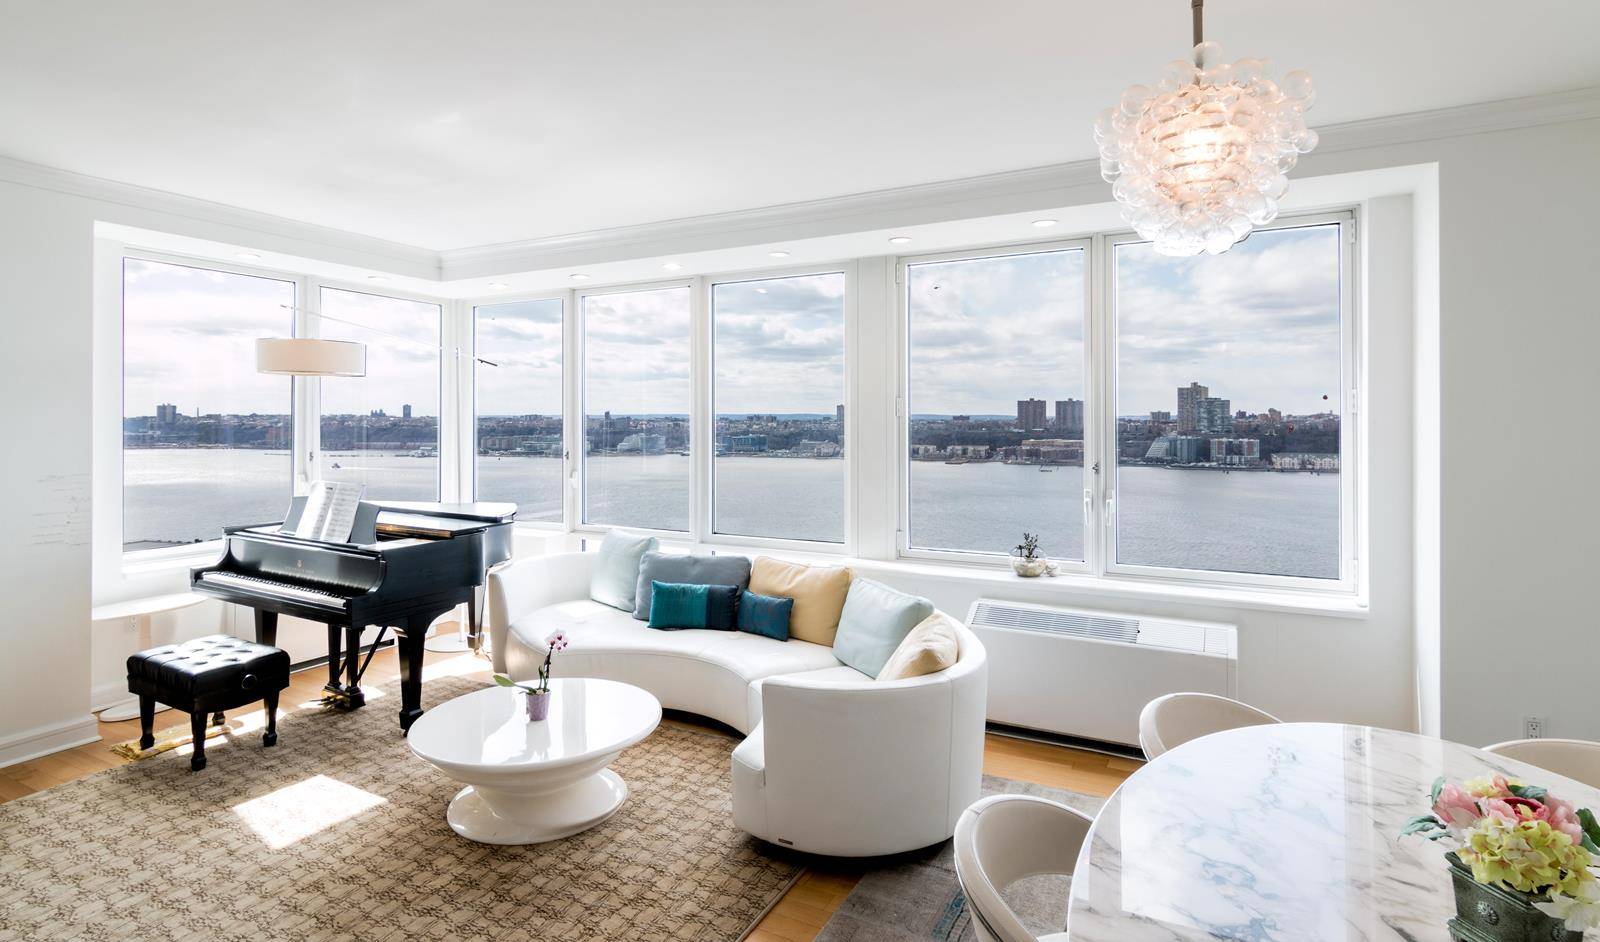 Stunning views of the Hudson River This corner unit 3BR 3.